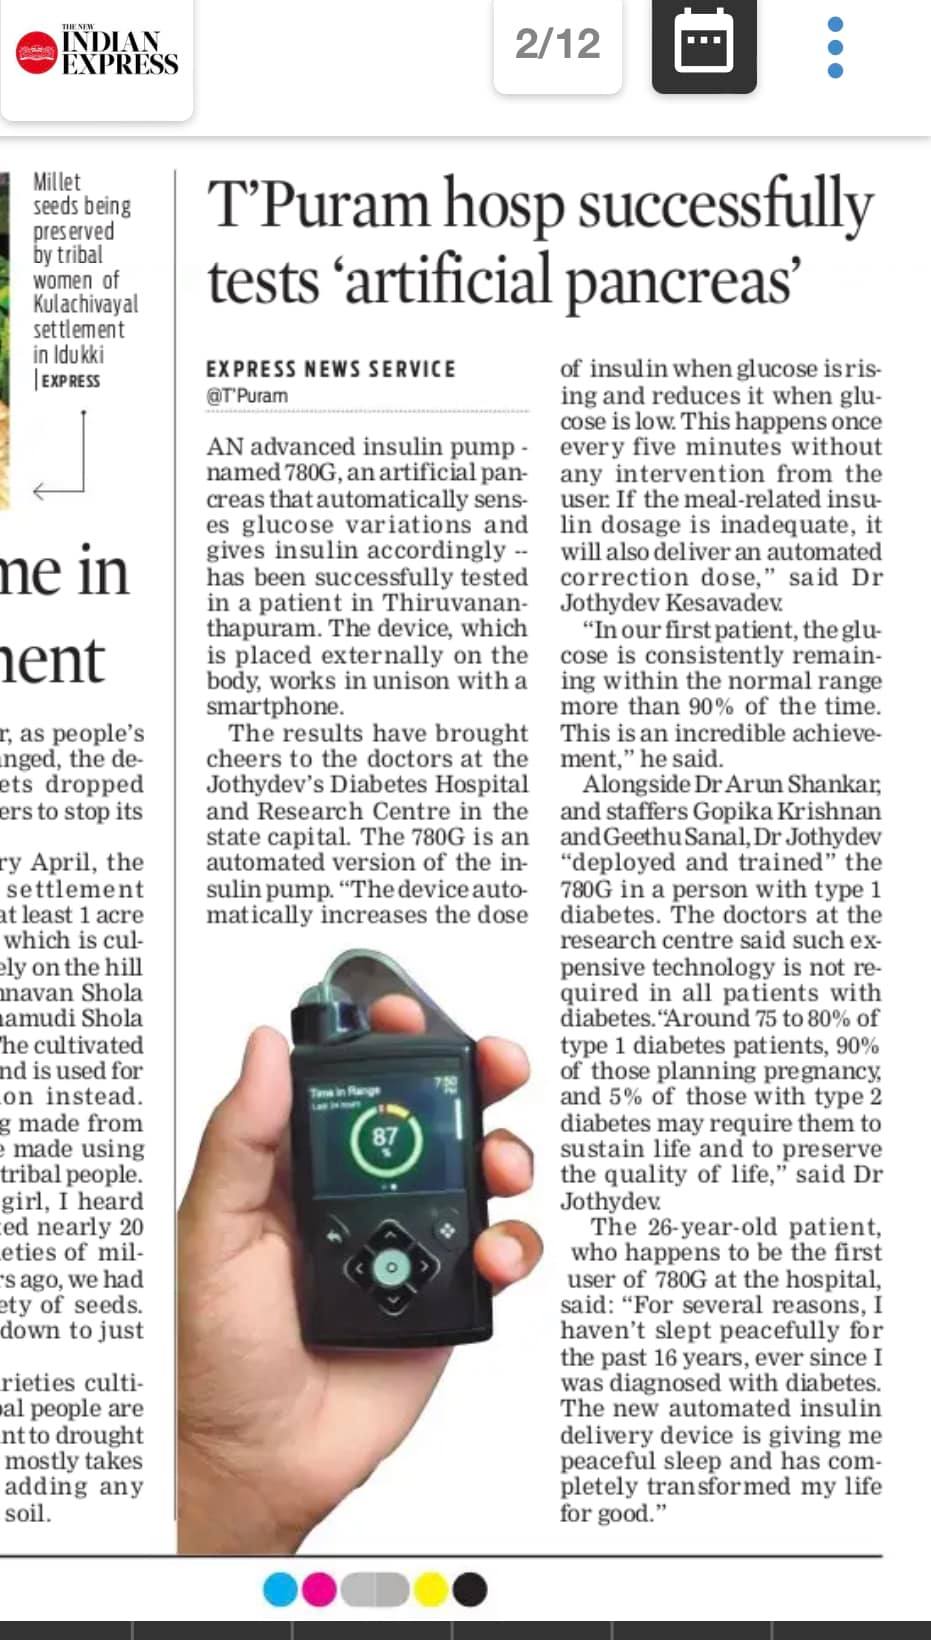 February 20, 2022: Newspaper articles on the launch of MiniMed 780G artificial pancreas
in India